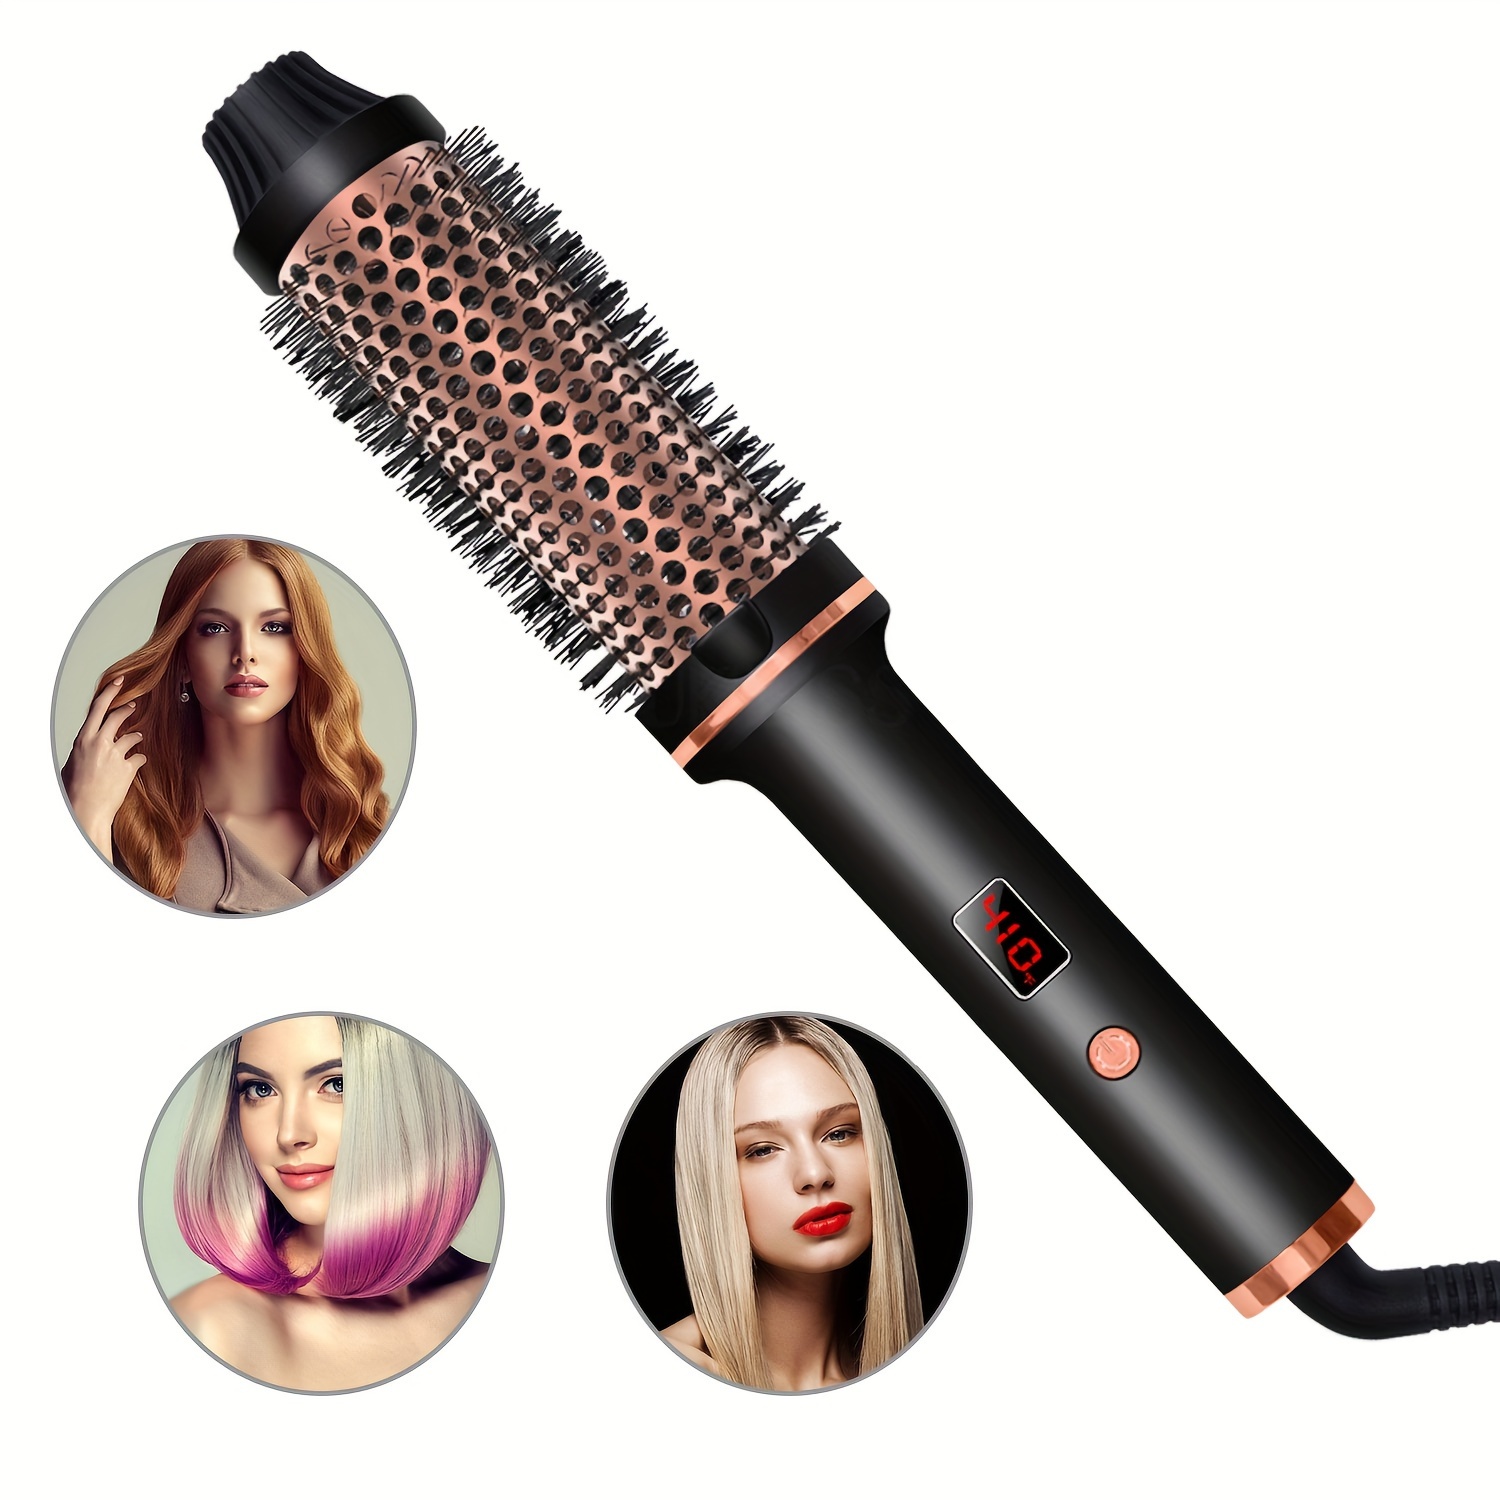 hair curling iron brush ceramic ionic hair curler hot brush creates loose volume curls heated hair styling brush curling iron volumizing comb hair curling wands holiday gift for women